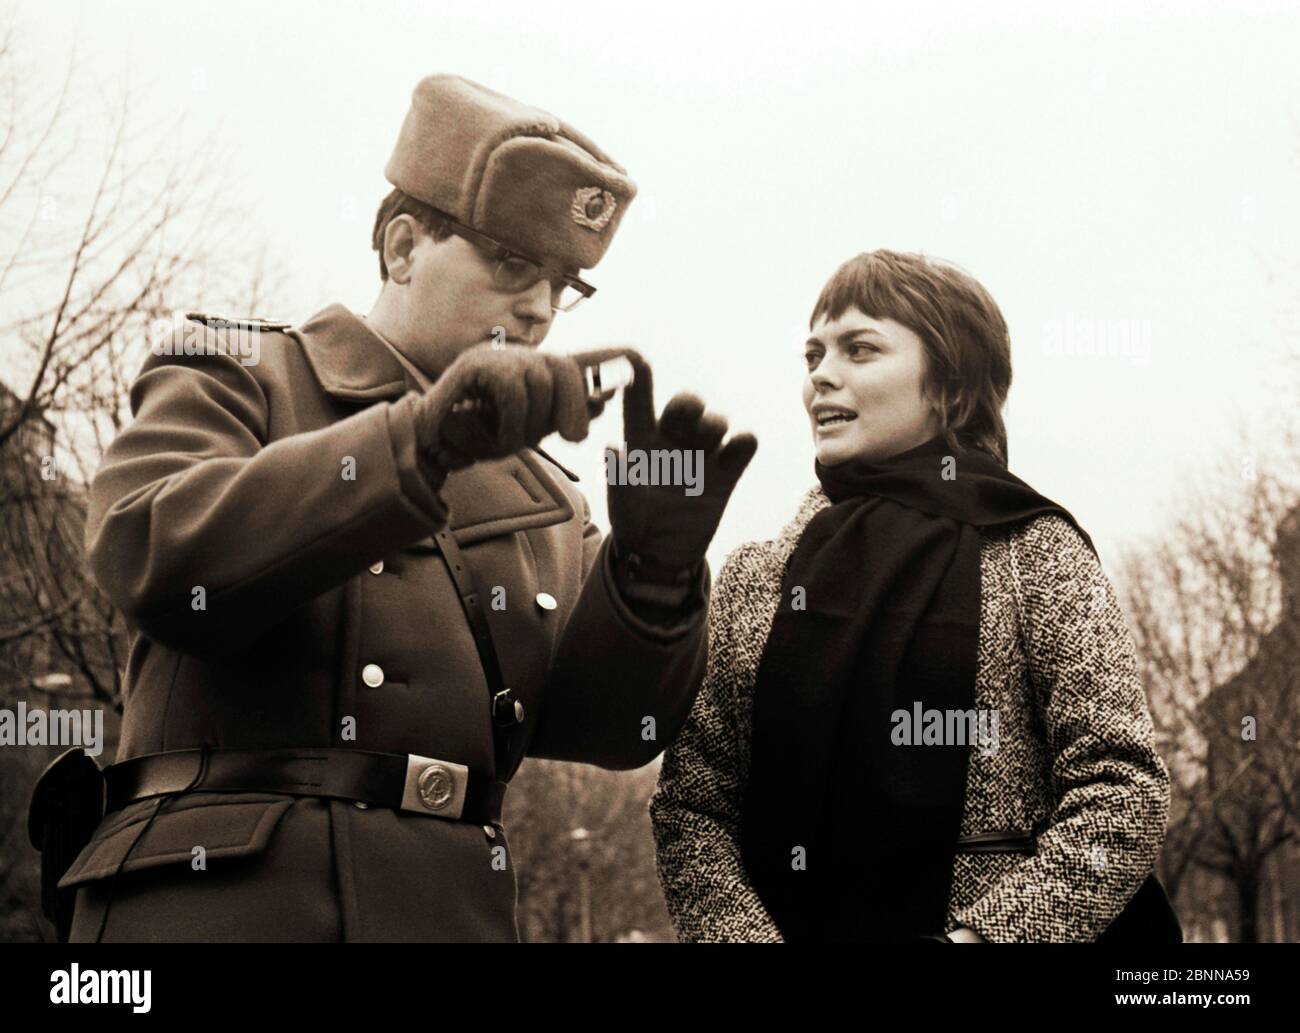 The border guard and the girl - hit star Mireille Mathieu with a border official of the GDR at the Checkpoint Charlie crossing in Berlin's Friedrichstrasse 1970 Stock Photo